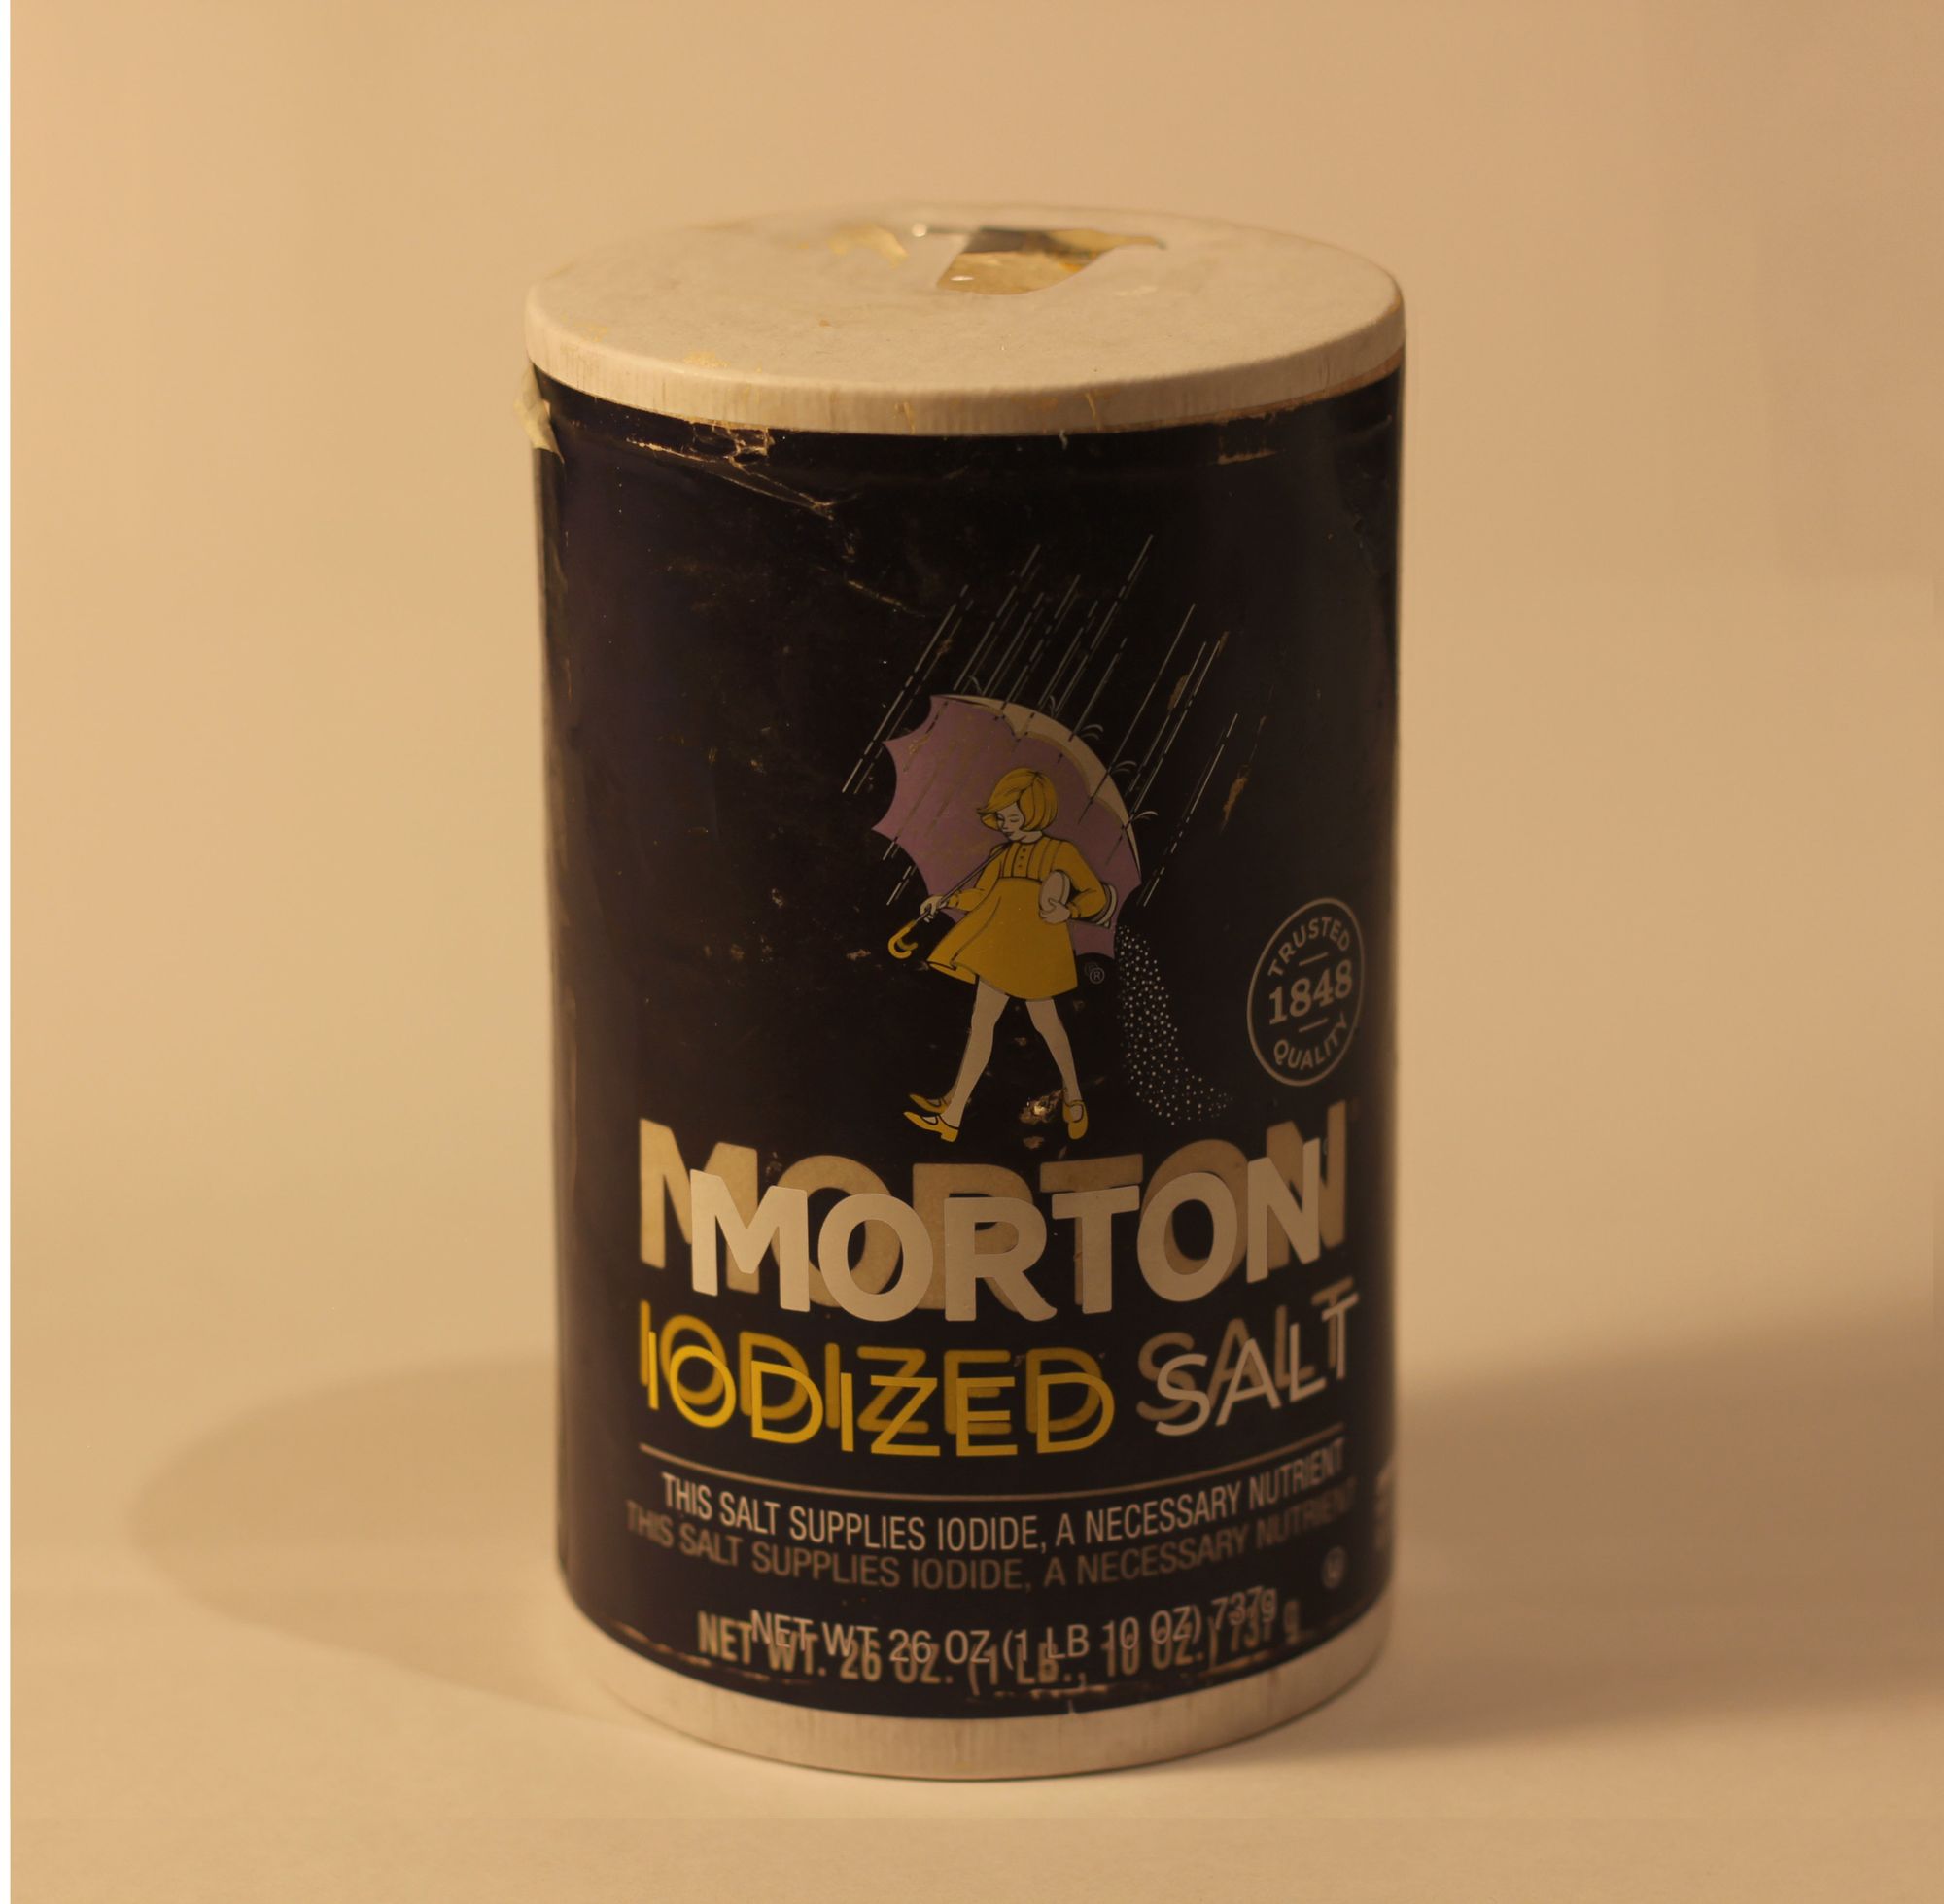 Photoshop Project: my morton salt container after 3 years